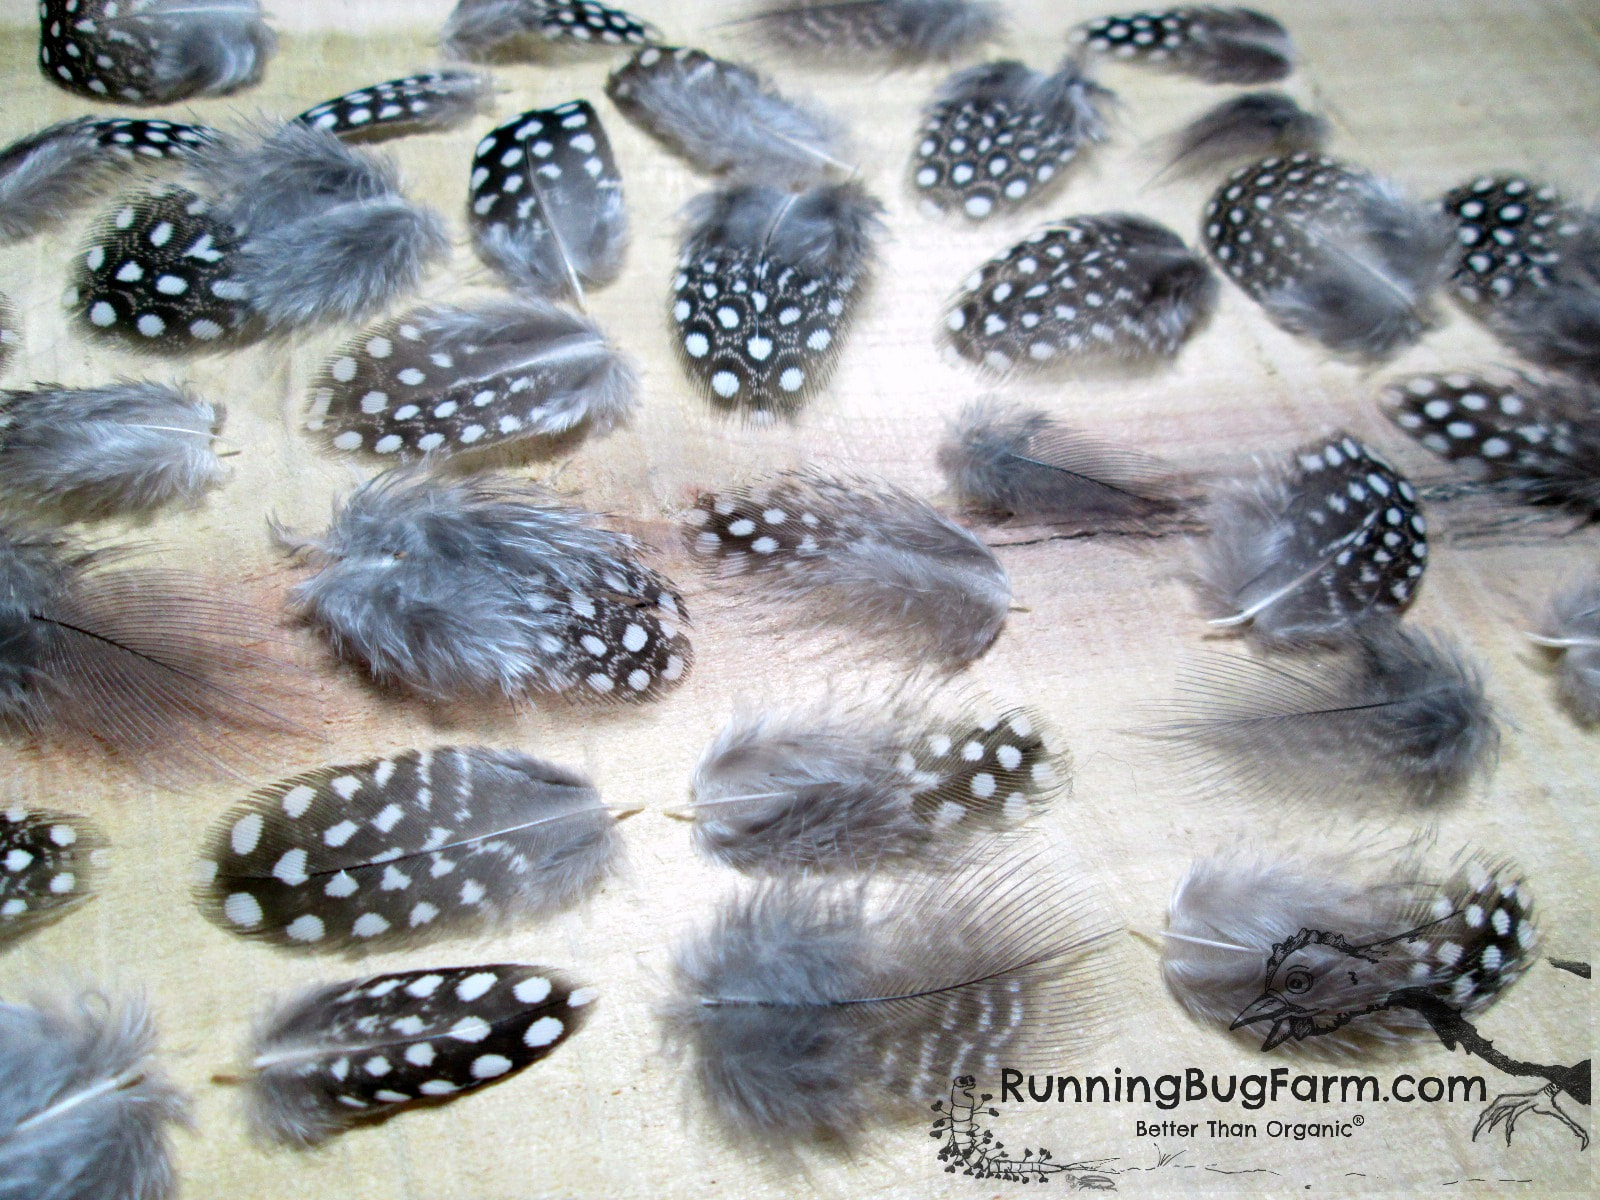 Soft Natural Guinea Fowl Spotted Feathers Crafts 5-10cm Chicken